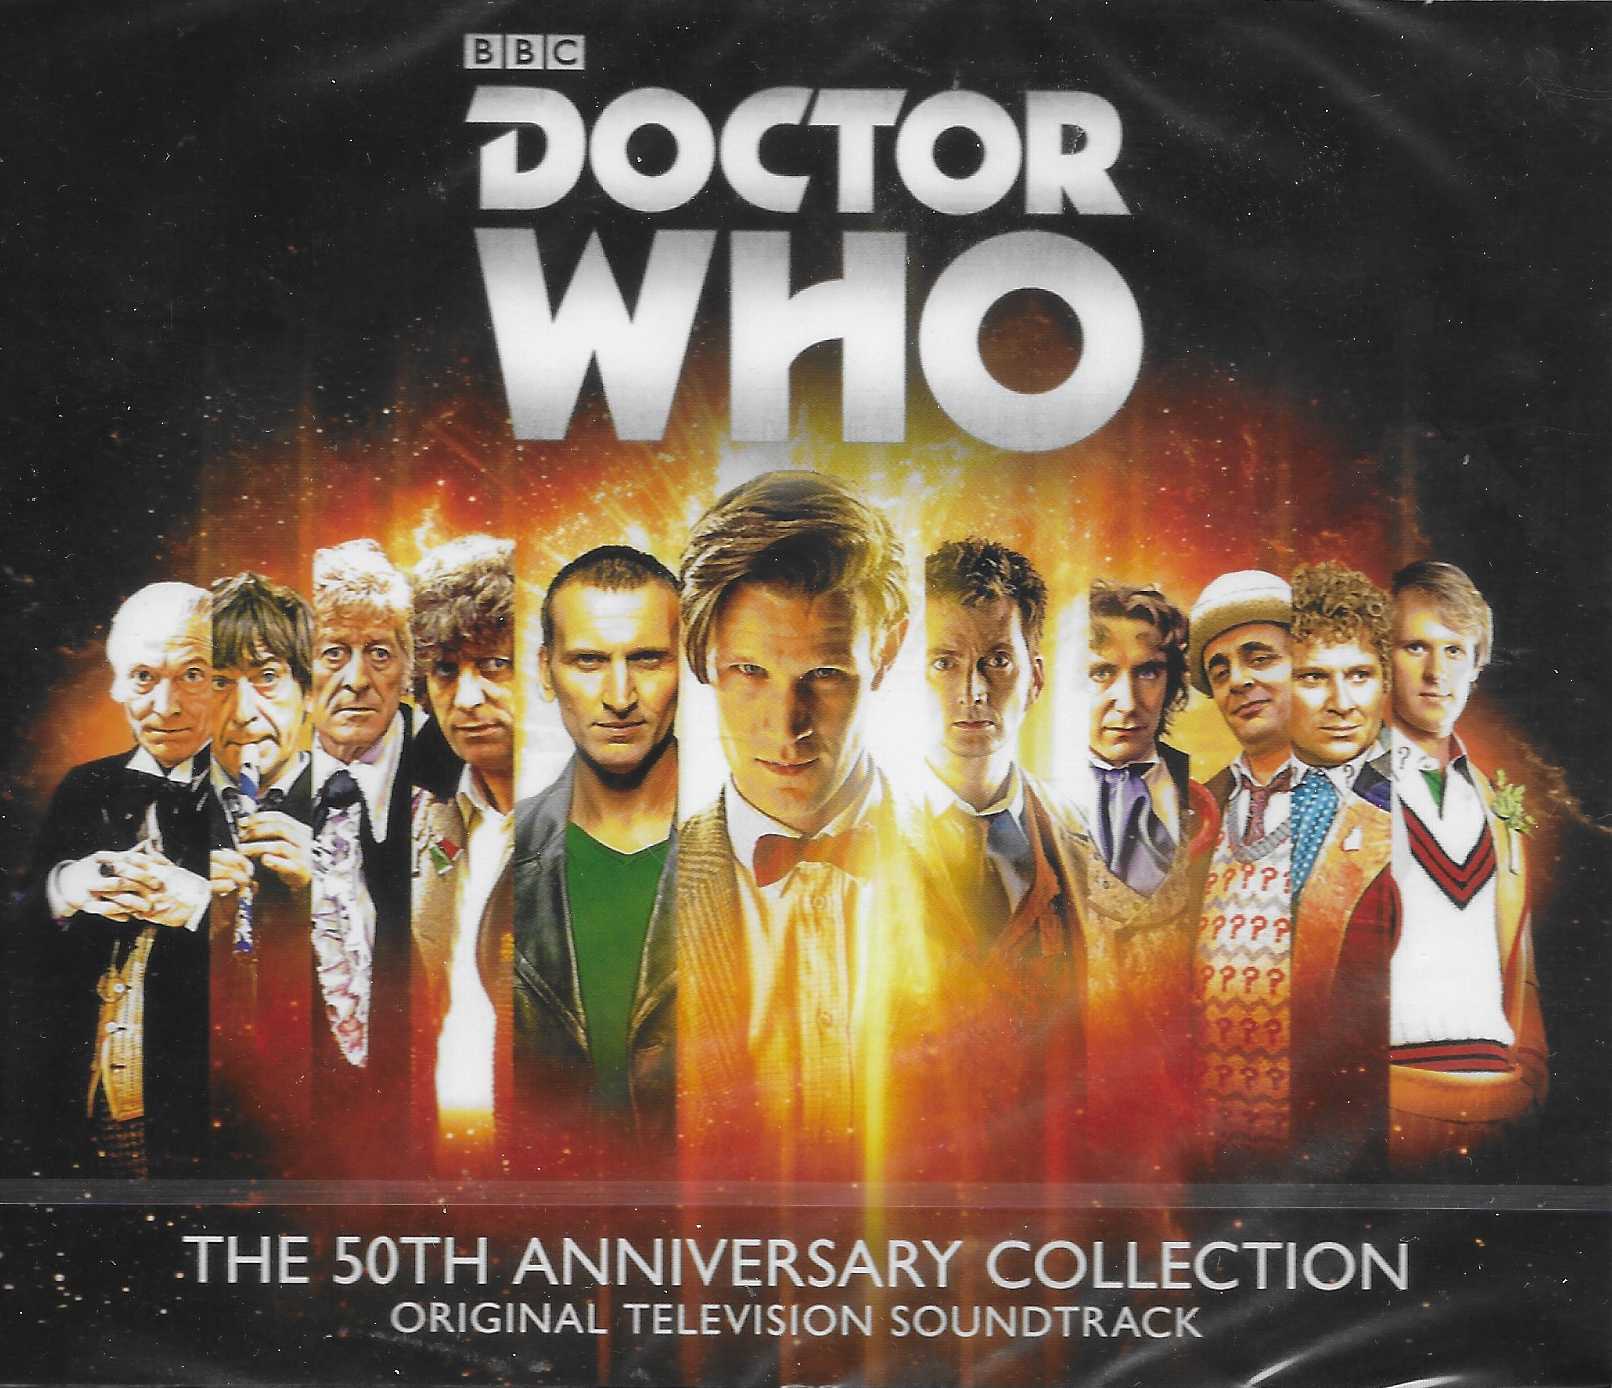 Picture of SILCD 1450 Doctor Who - The 50th anniversary collection by artist Various from the BBC records and Tapes library